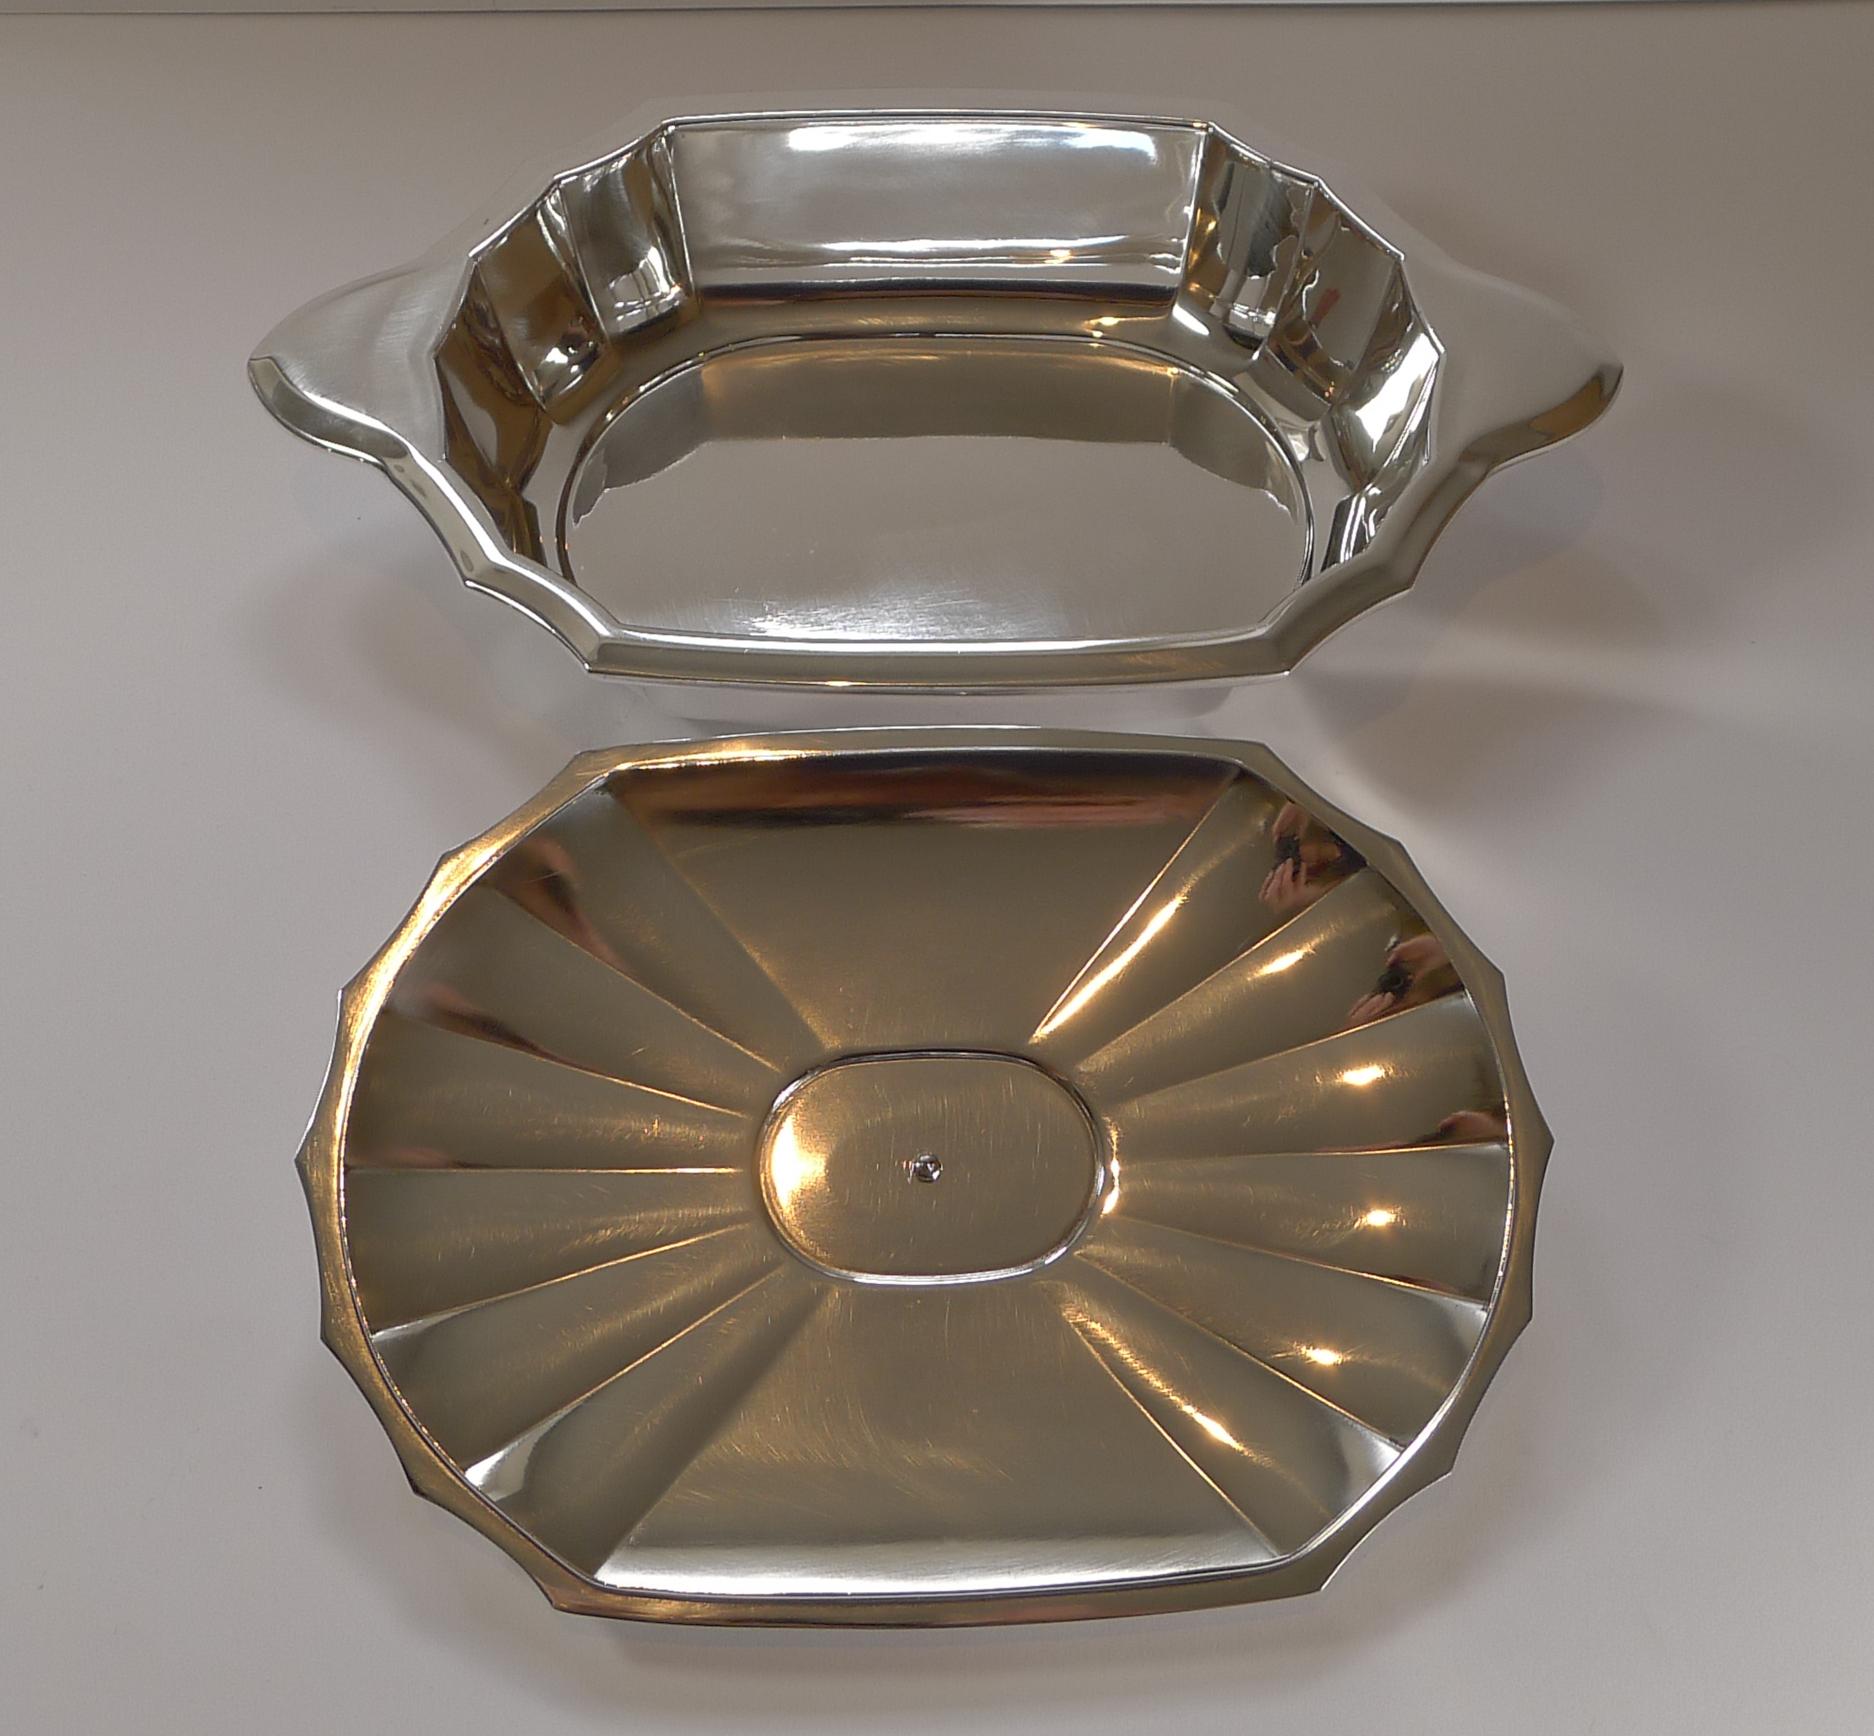 Silver Plate French Art Deco Christofle / Gallia Covered Serving Dish, c. 1930 For Sale